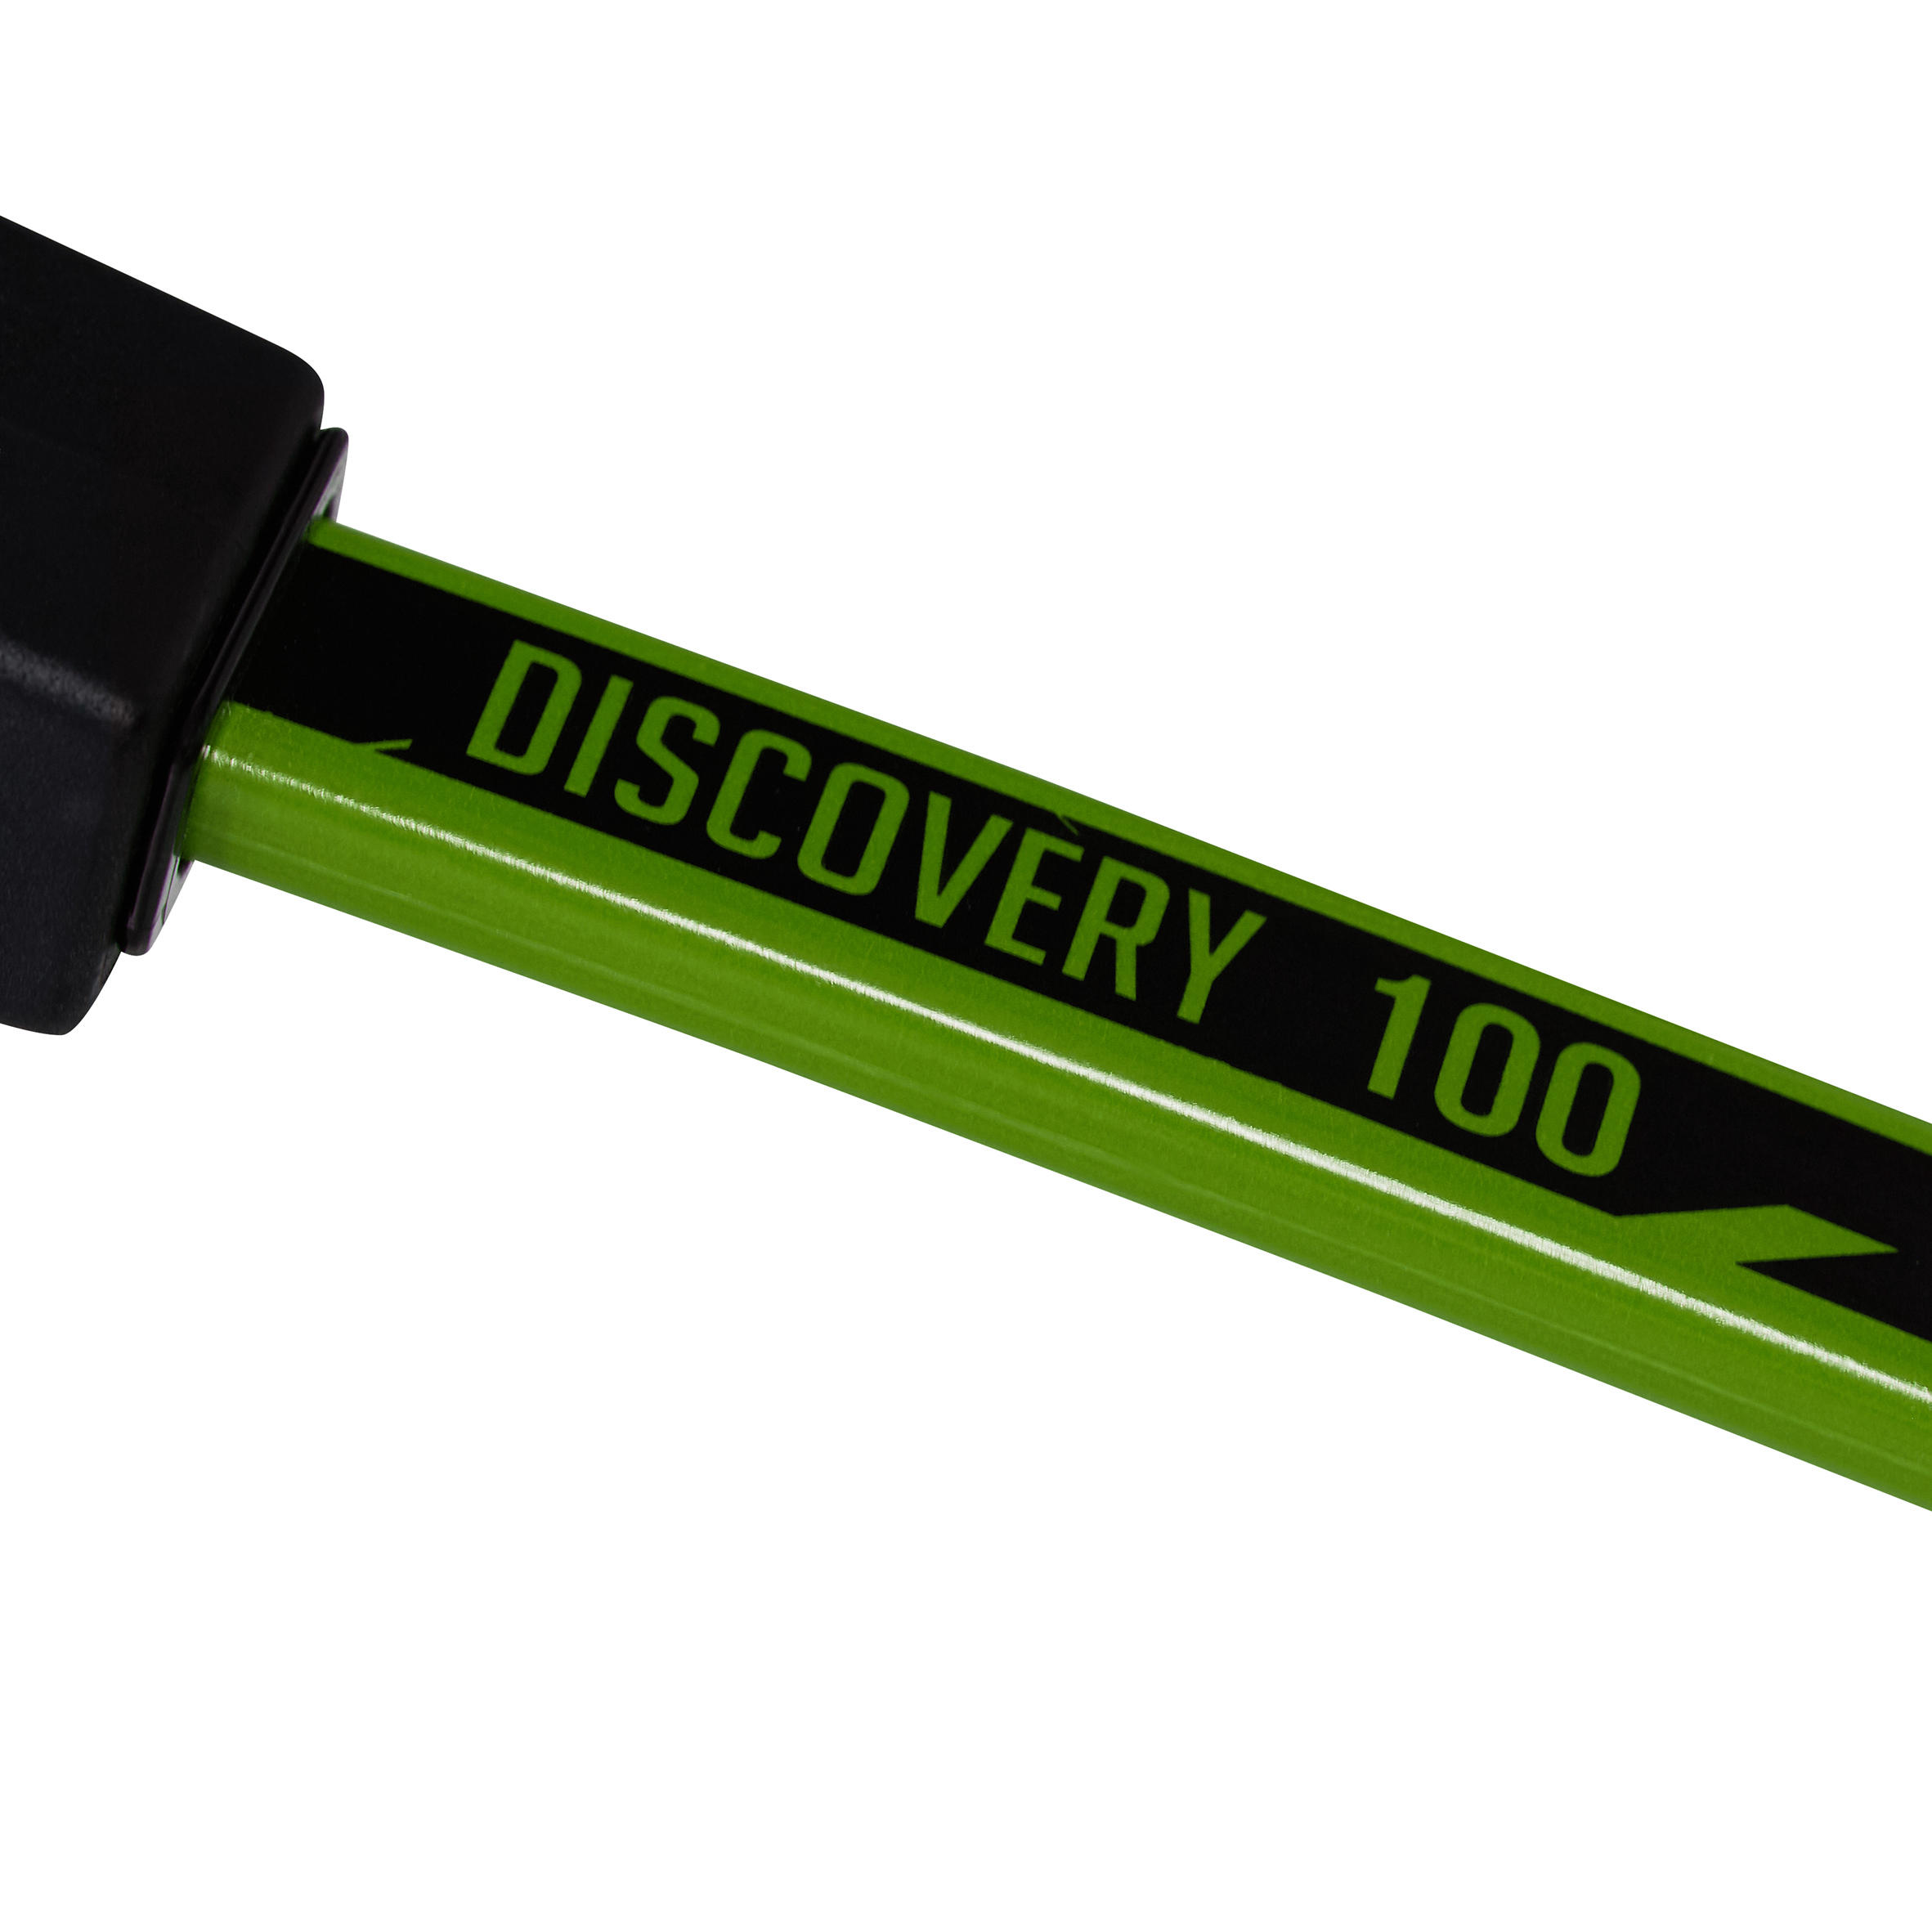 Discovery 100 Archery Bow - Green 11/15